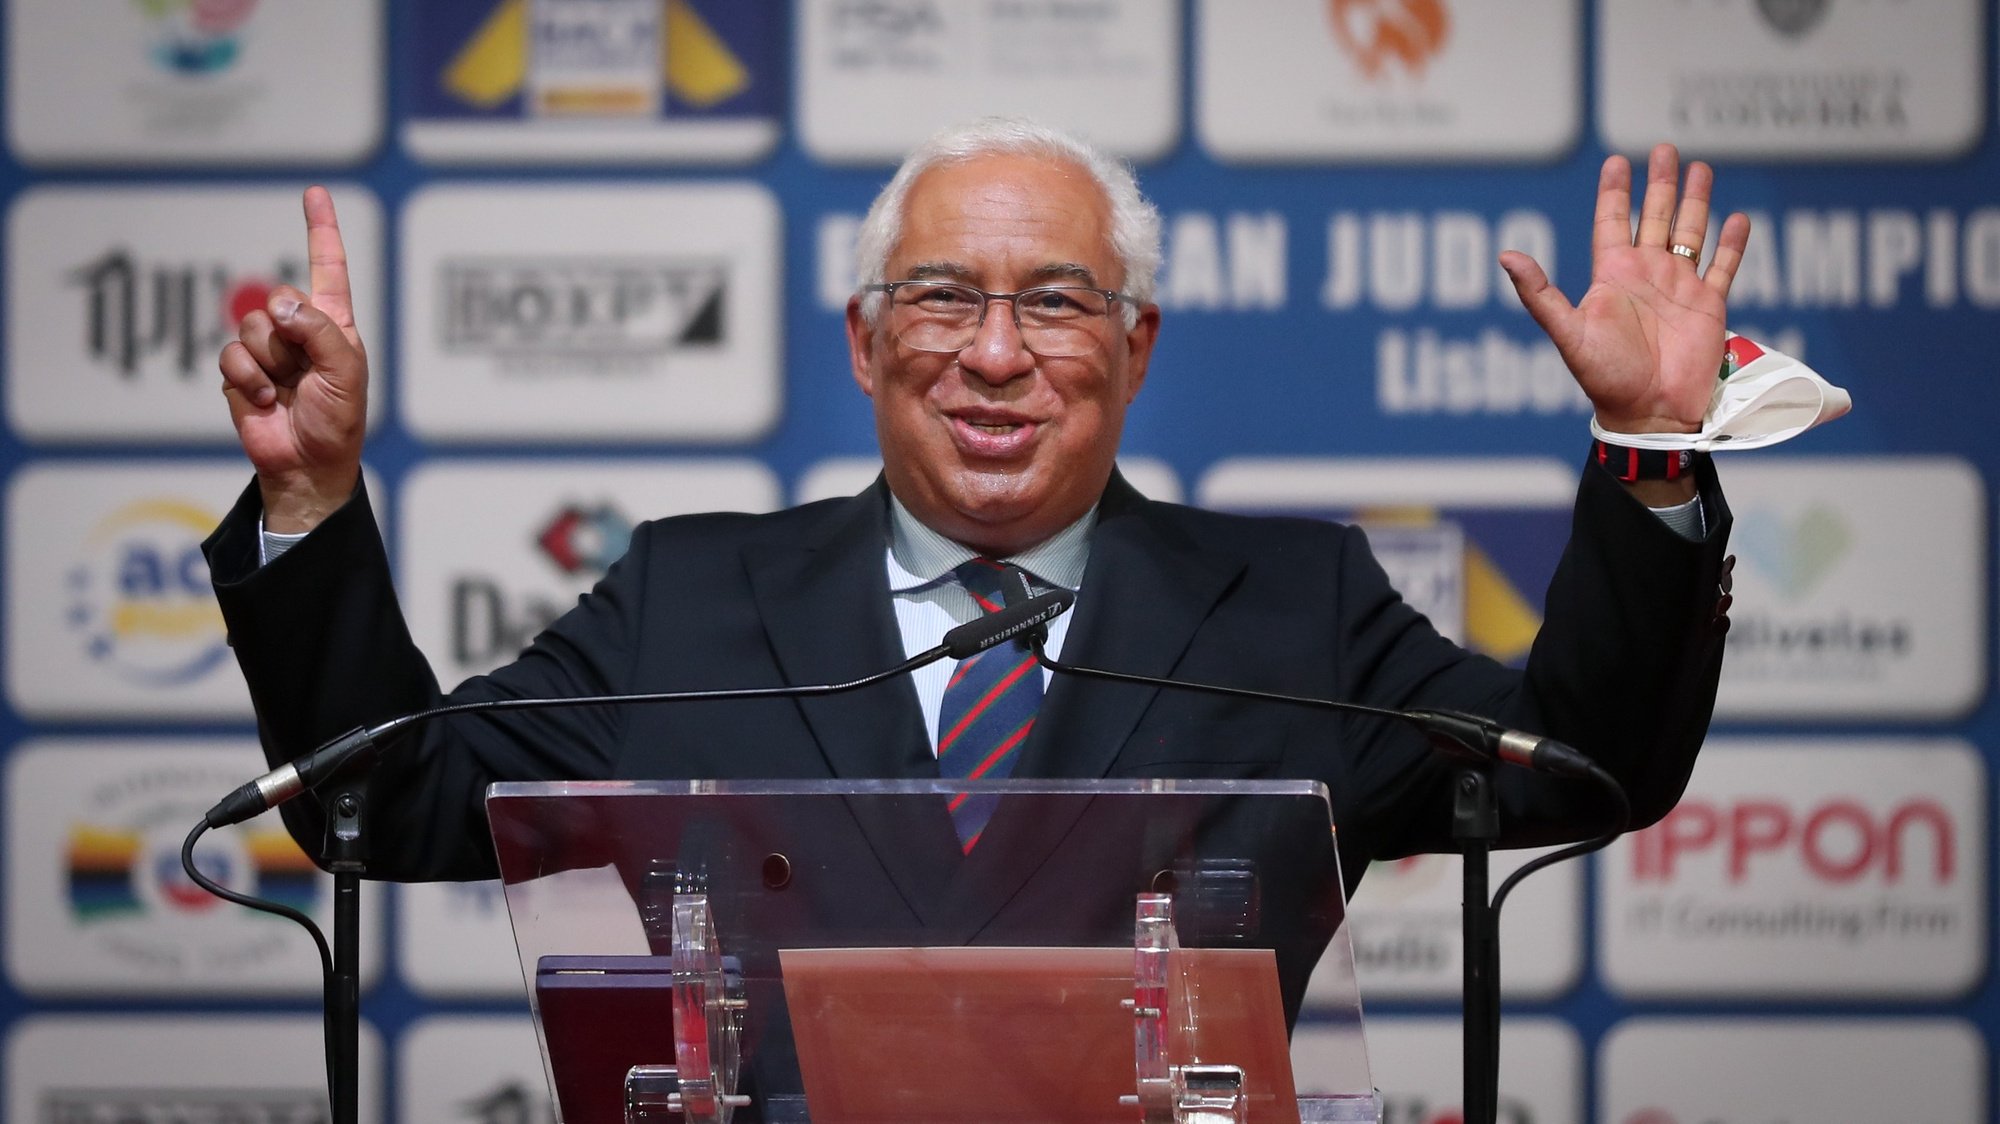 Portuguese Prime-minister, António Costa, delivers a speech during the awarding ceremony of Telma Monteiro of Portugal, winner of the gold medal in yesterday`s competition in the women&#039;s -57Kg category, with the &quot;Medal of Honor of Sports Merit&quot; delivered at the European Judo Championships in Lisbon, Portugal, 17 April 2021. NUNO VEIGA/LUSA